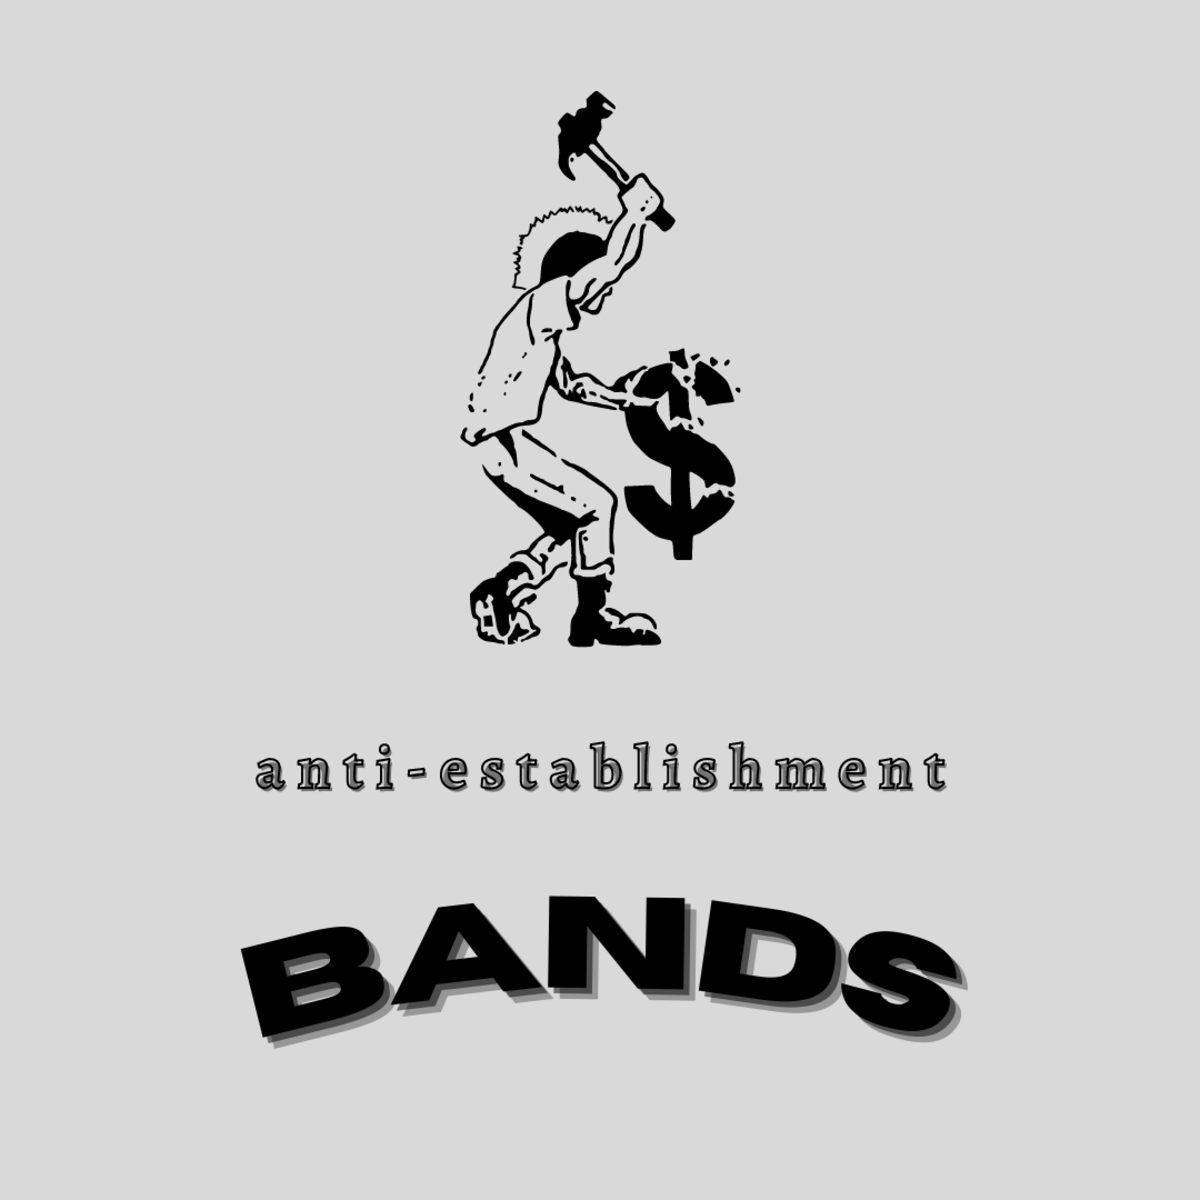 The best anti-establishment and anti-government bands